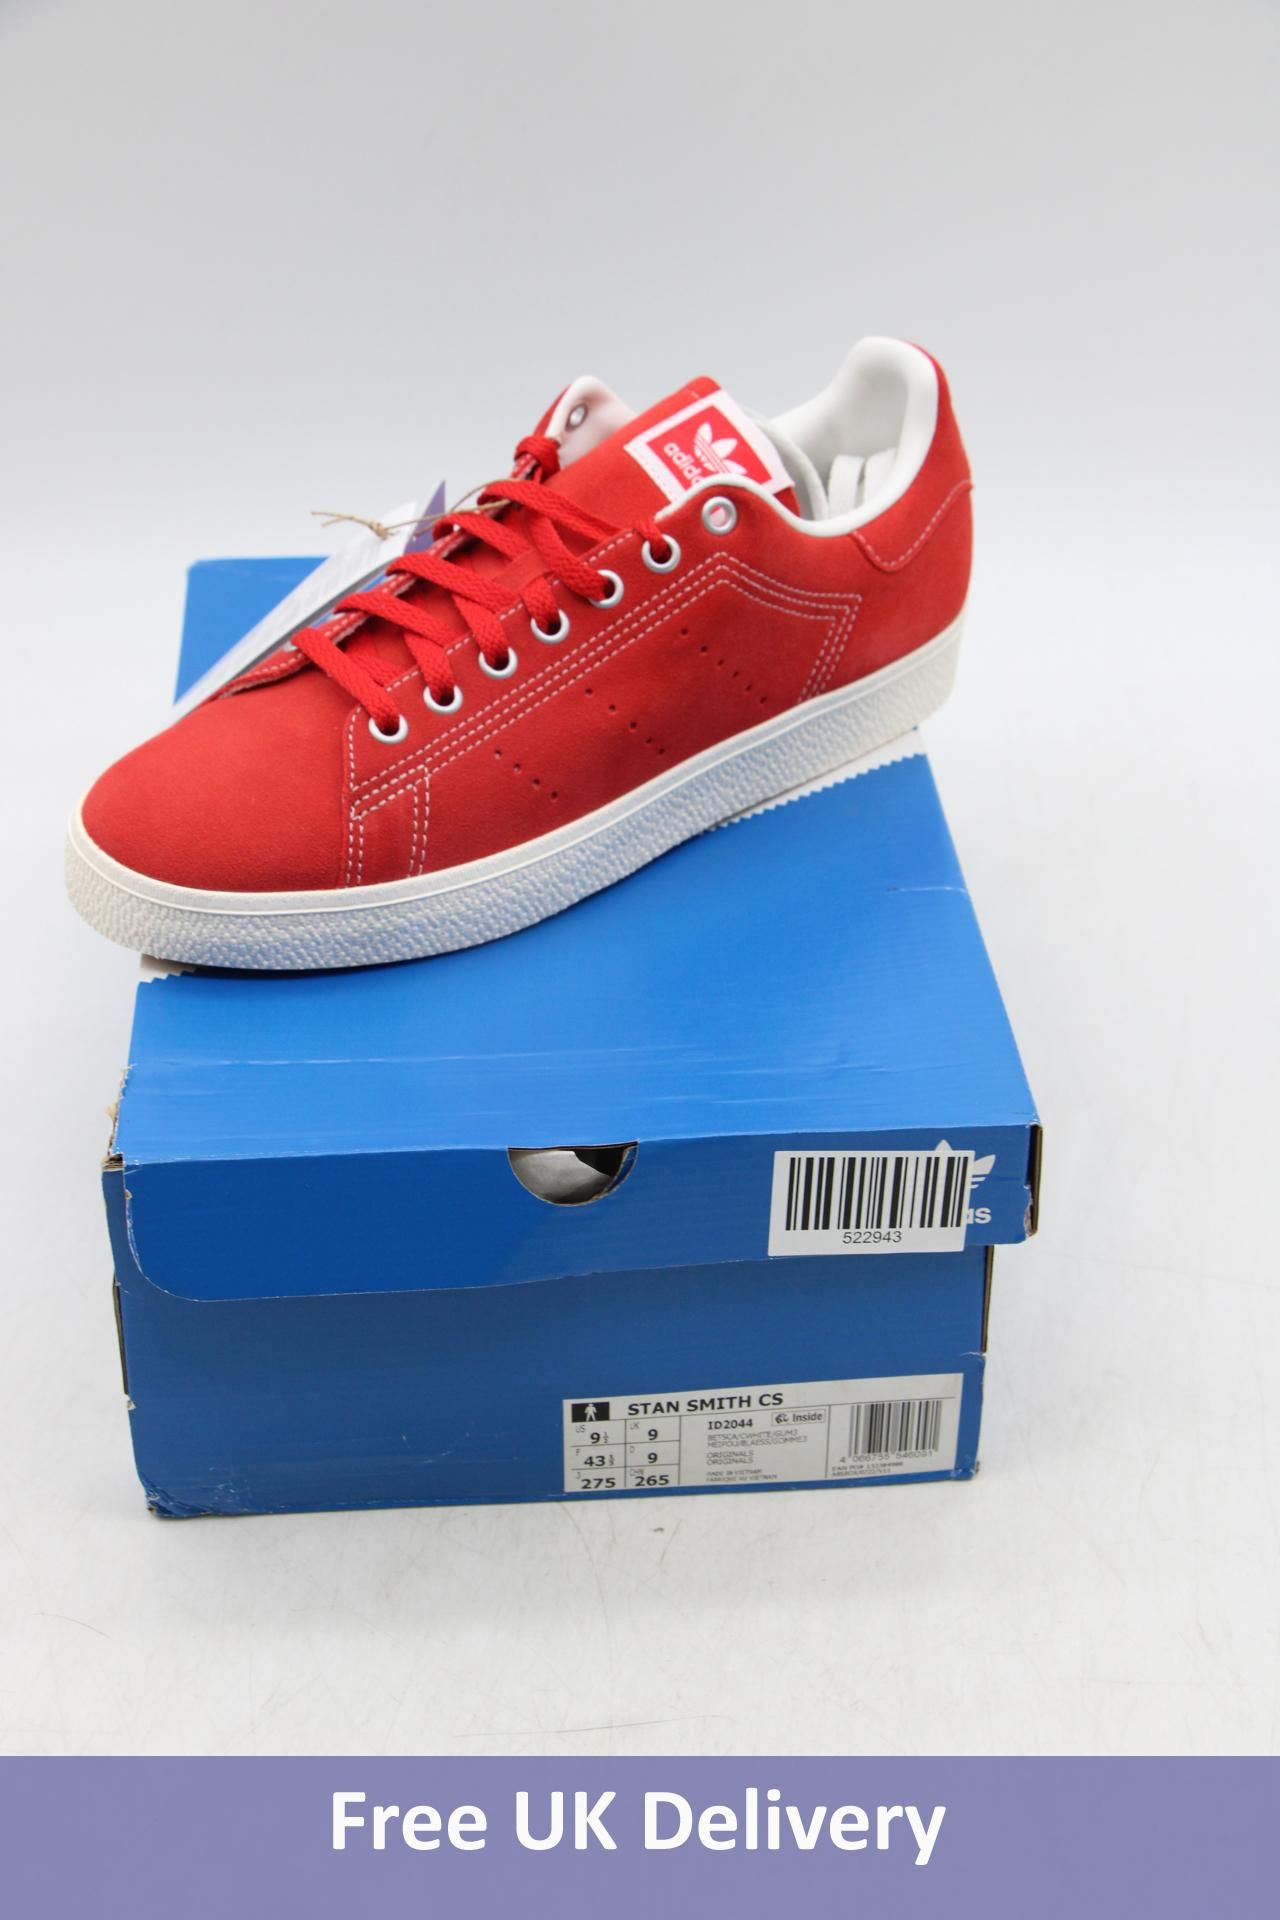 Adidas Stan Smith CS Suede Trainers, Red/White, UK 9. Box damaged